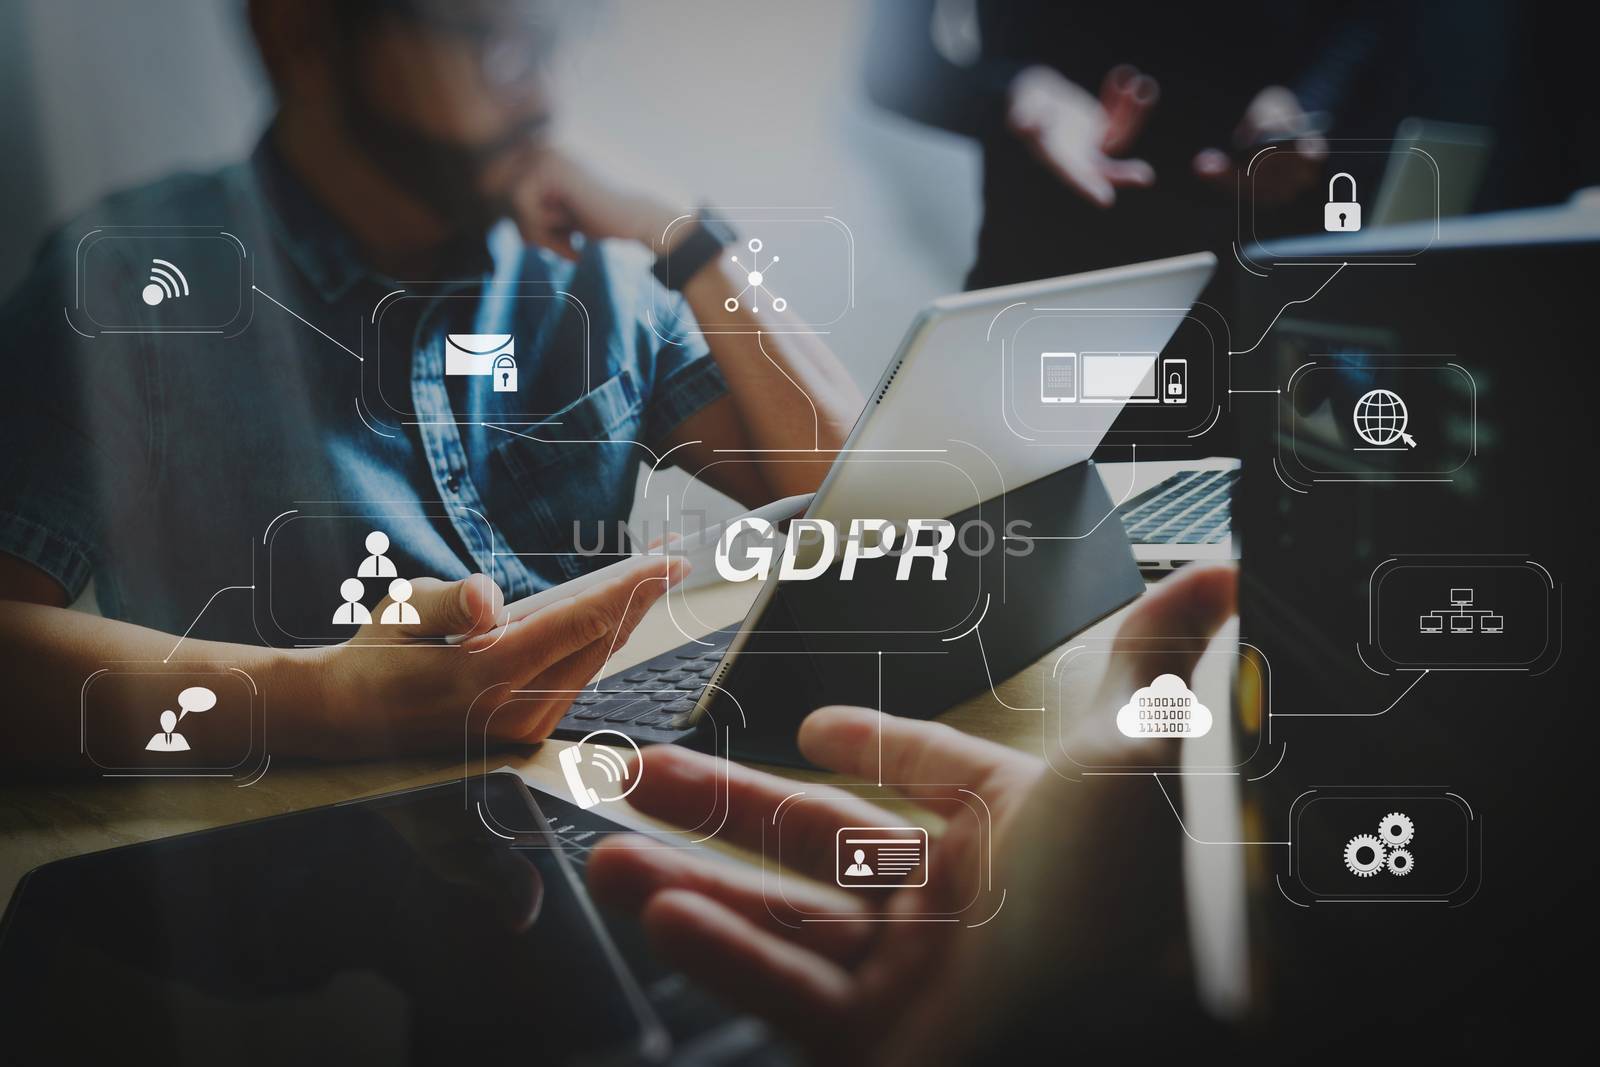 GDPR. Data Protection Regulation with Cyber security and privacy virtual diagram.StartUp Programming Team. Website designer working digital tablet dock keyboard and computer laptop with smart phone and compact server.